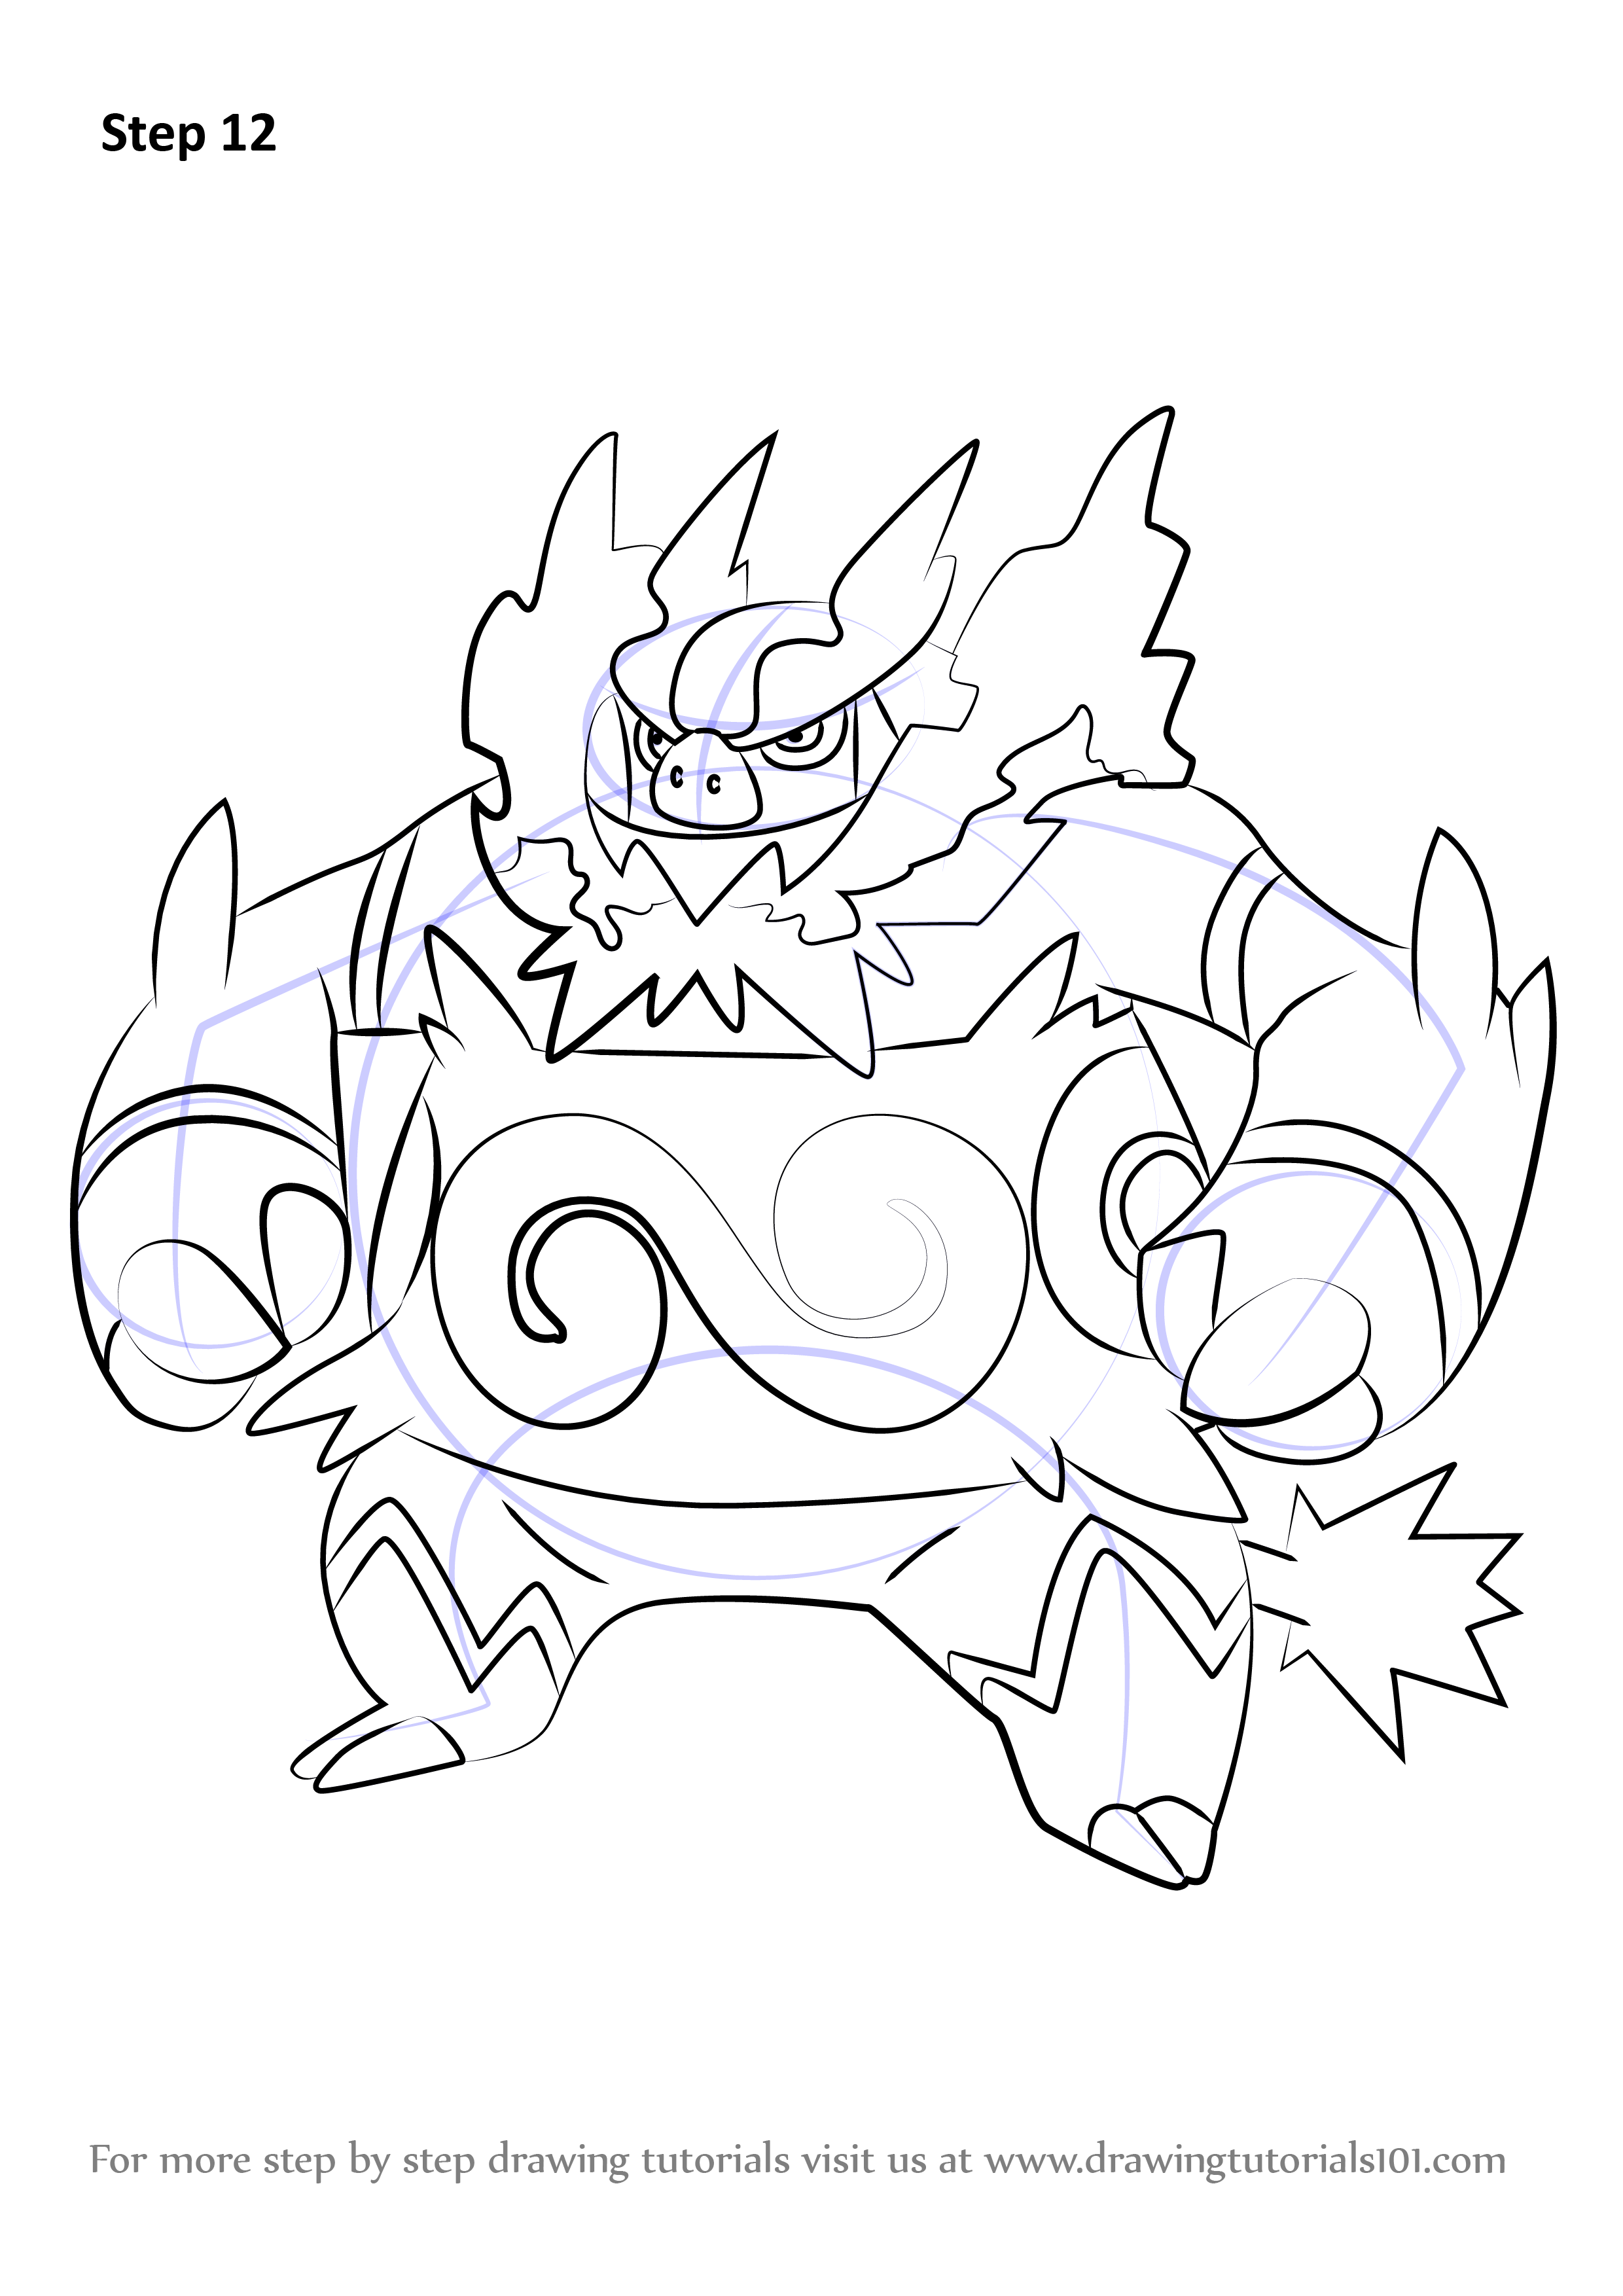 Learn How to Draw Emboar from Pokemon Pokemon Step by 